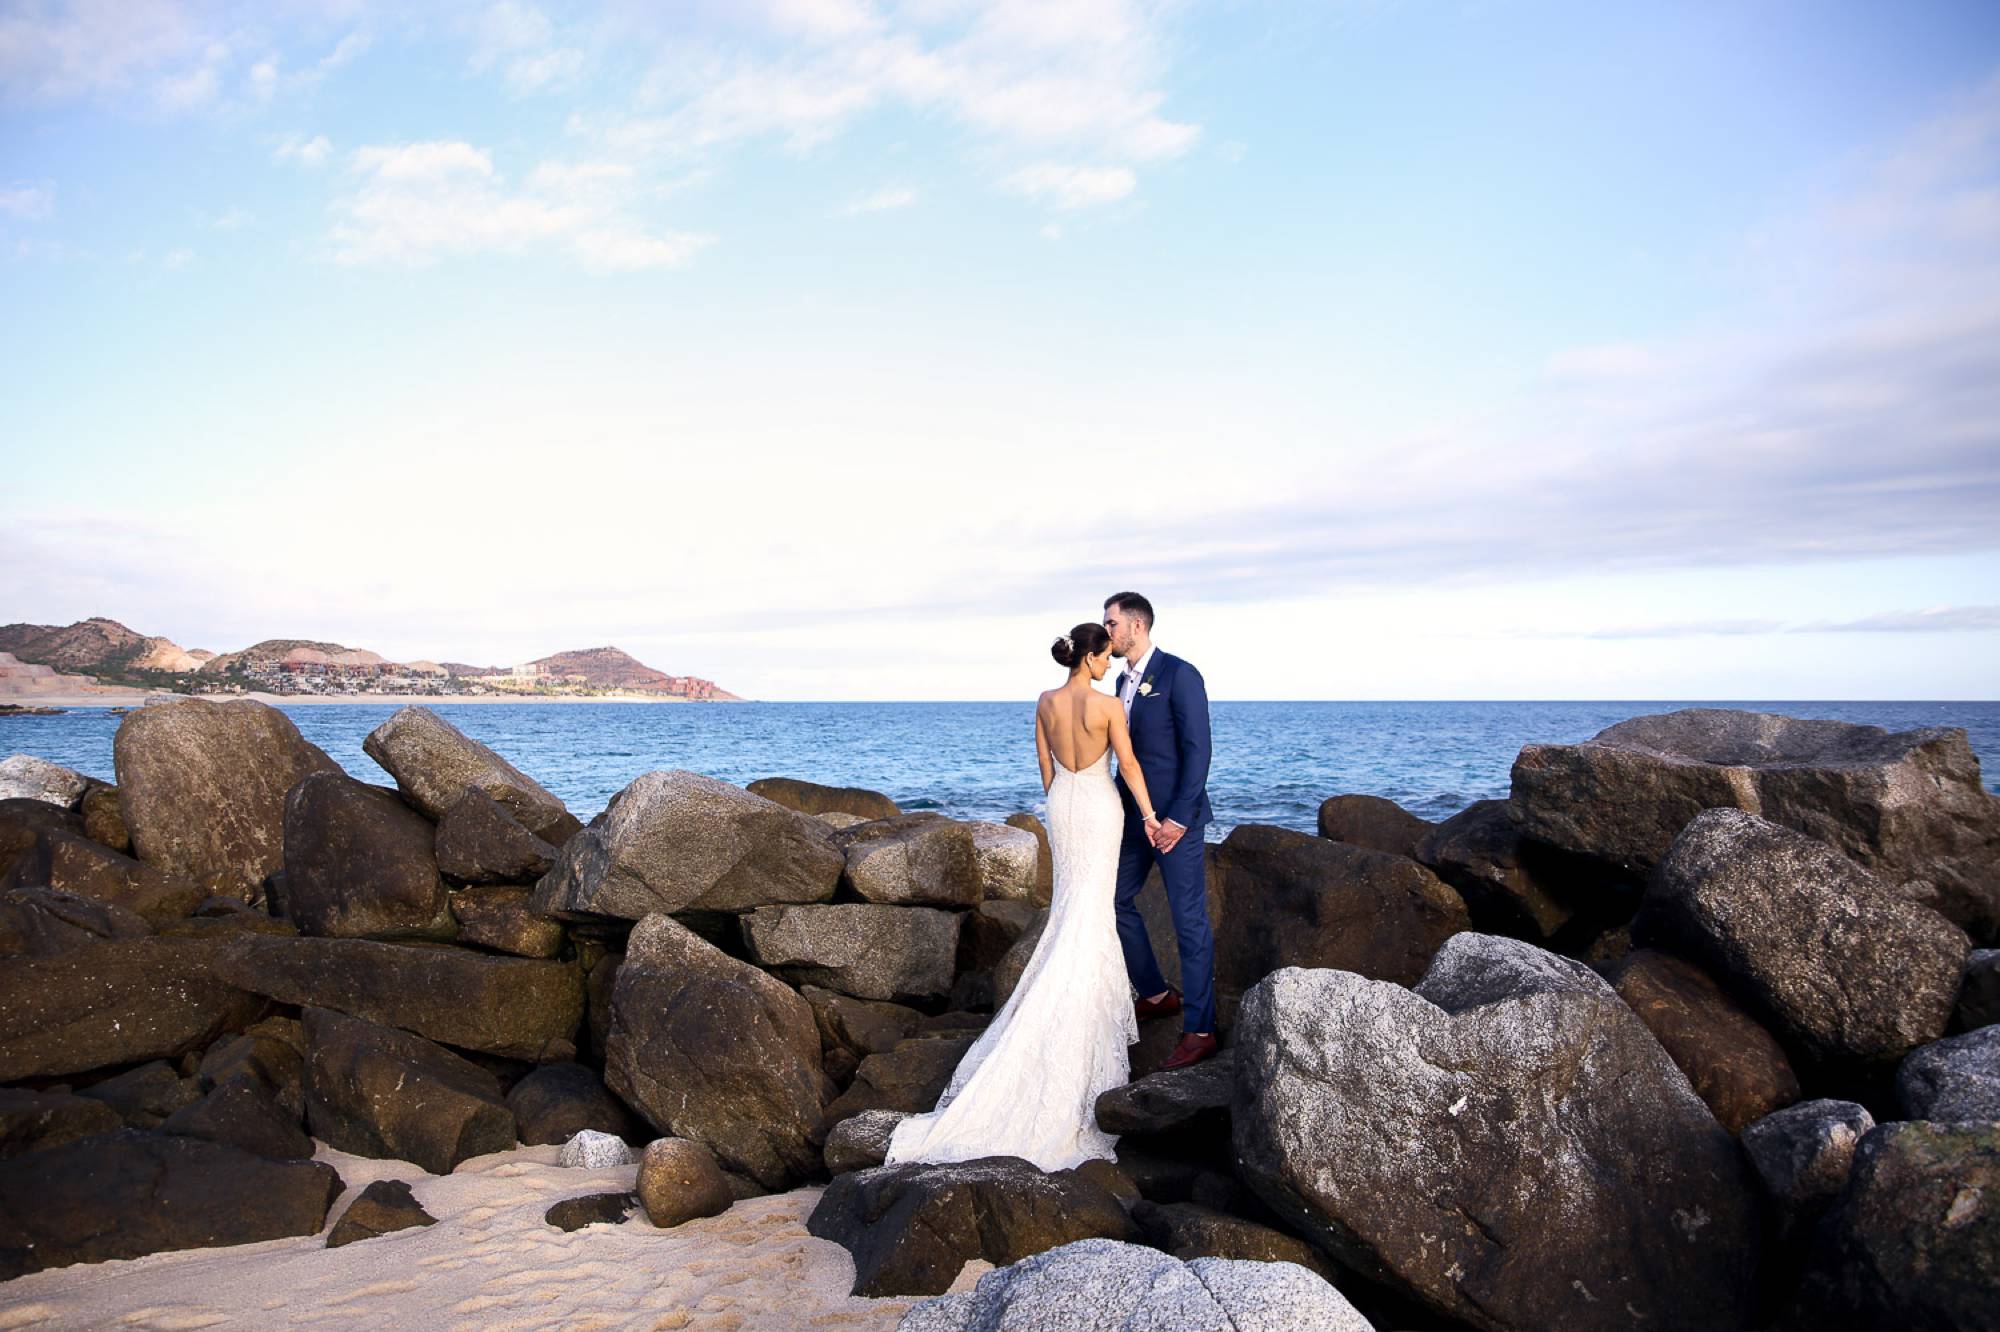 Couple on beach in Mexico, Wedding day, wedding gown and tuxedo